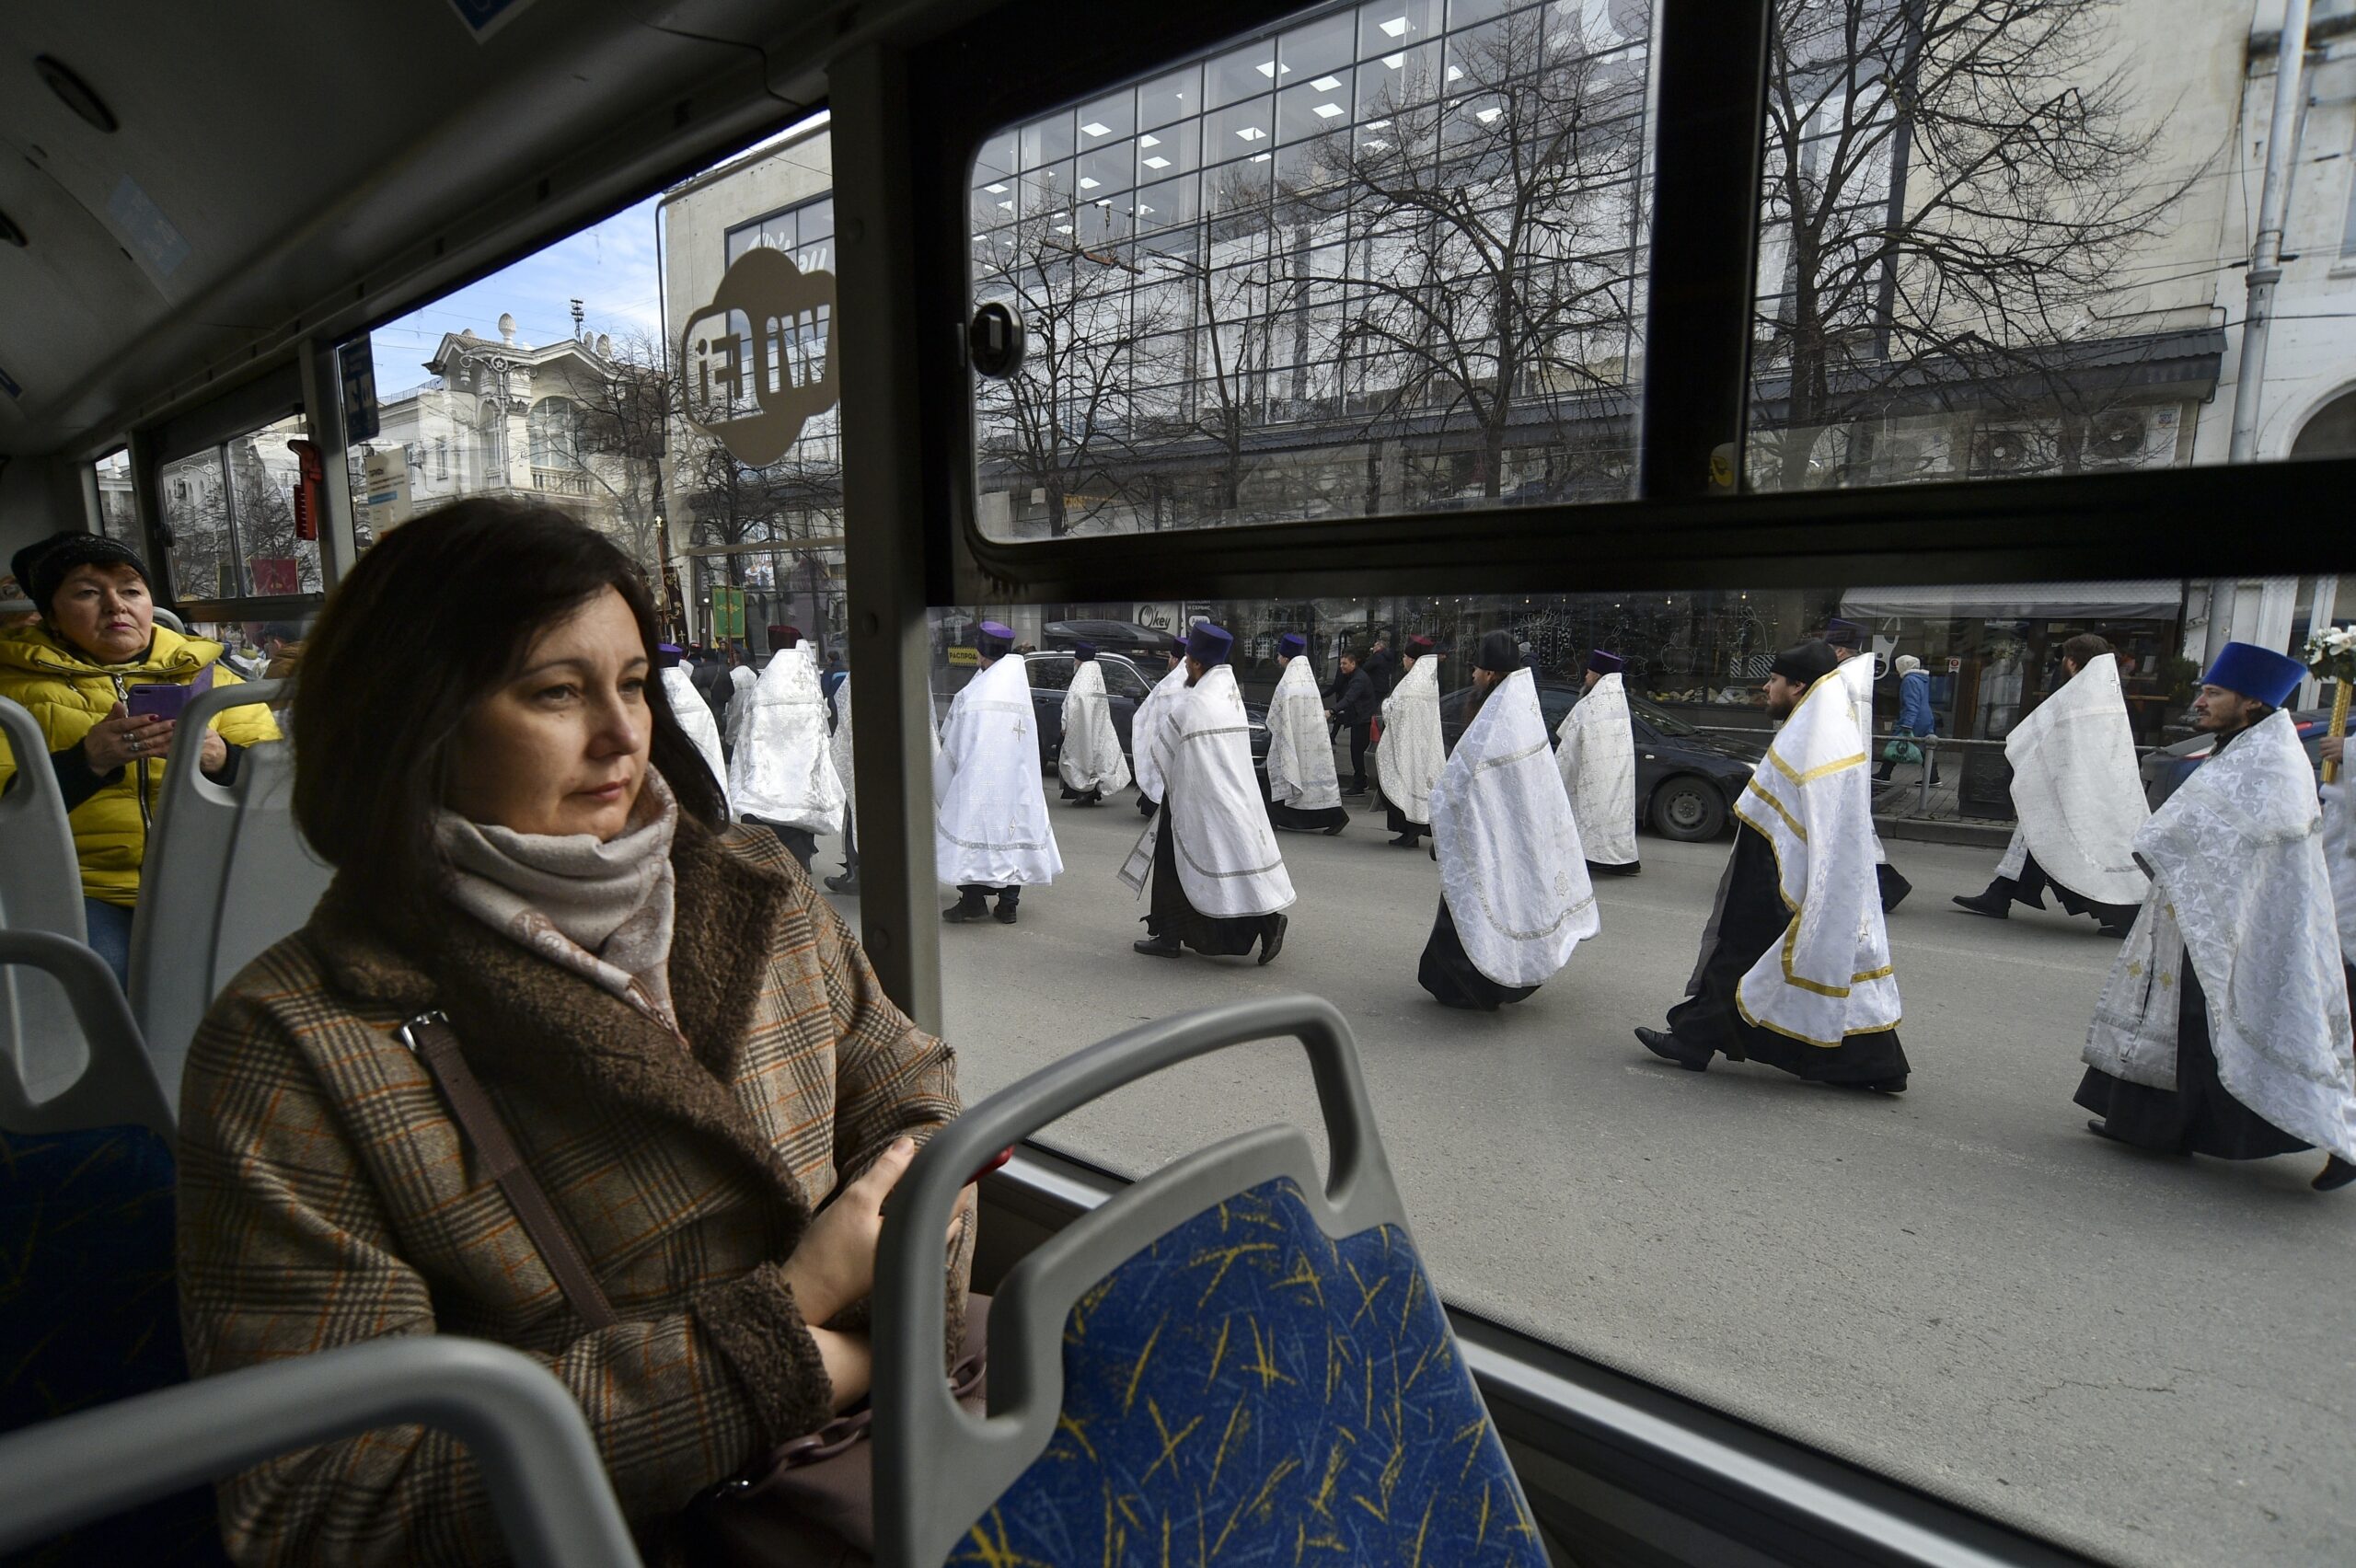 A woman looks through a bus window as Russian Orthodox priests and believers participate in the procession celebrating Orthodox Christmas in Sevastopol, Crimea, Saturday, Jan. 7, 2023. Orthodox Christians celebrate Christmas on Jan. 7, in accordance with the Julian calendar. (AP Photo)